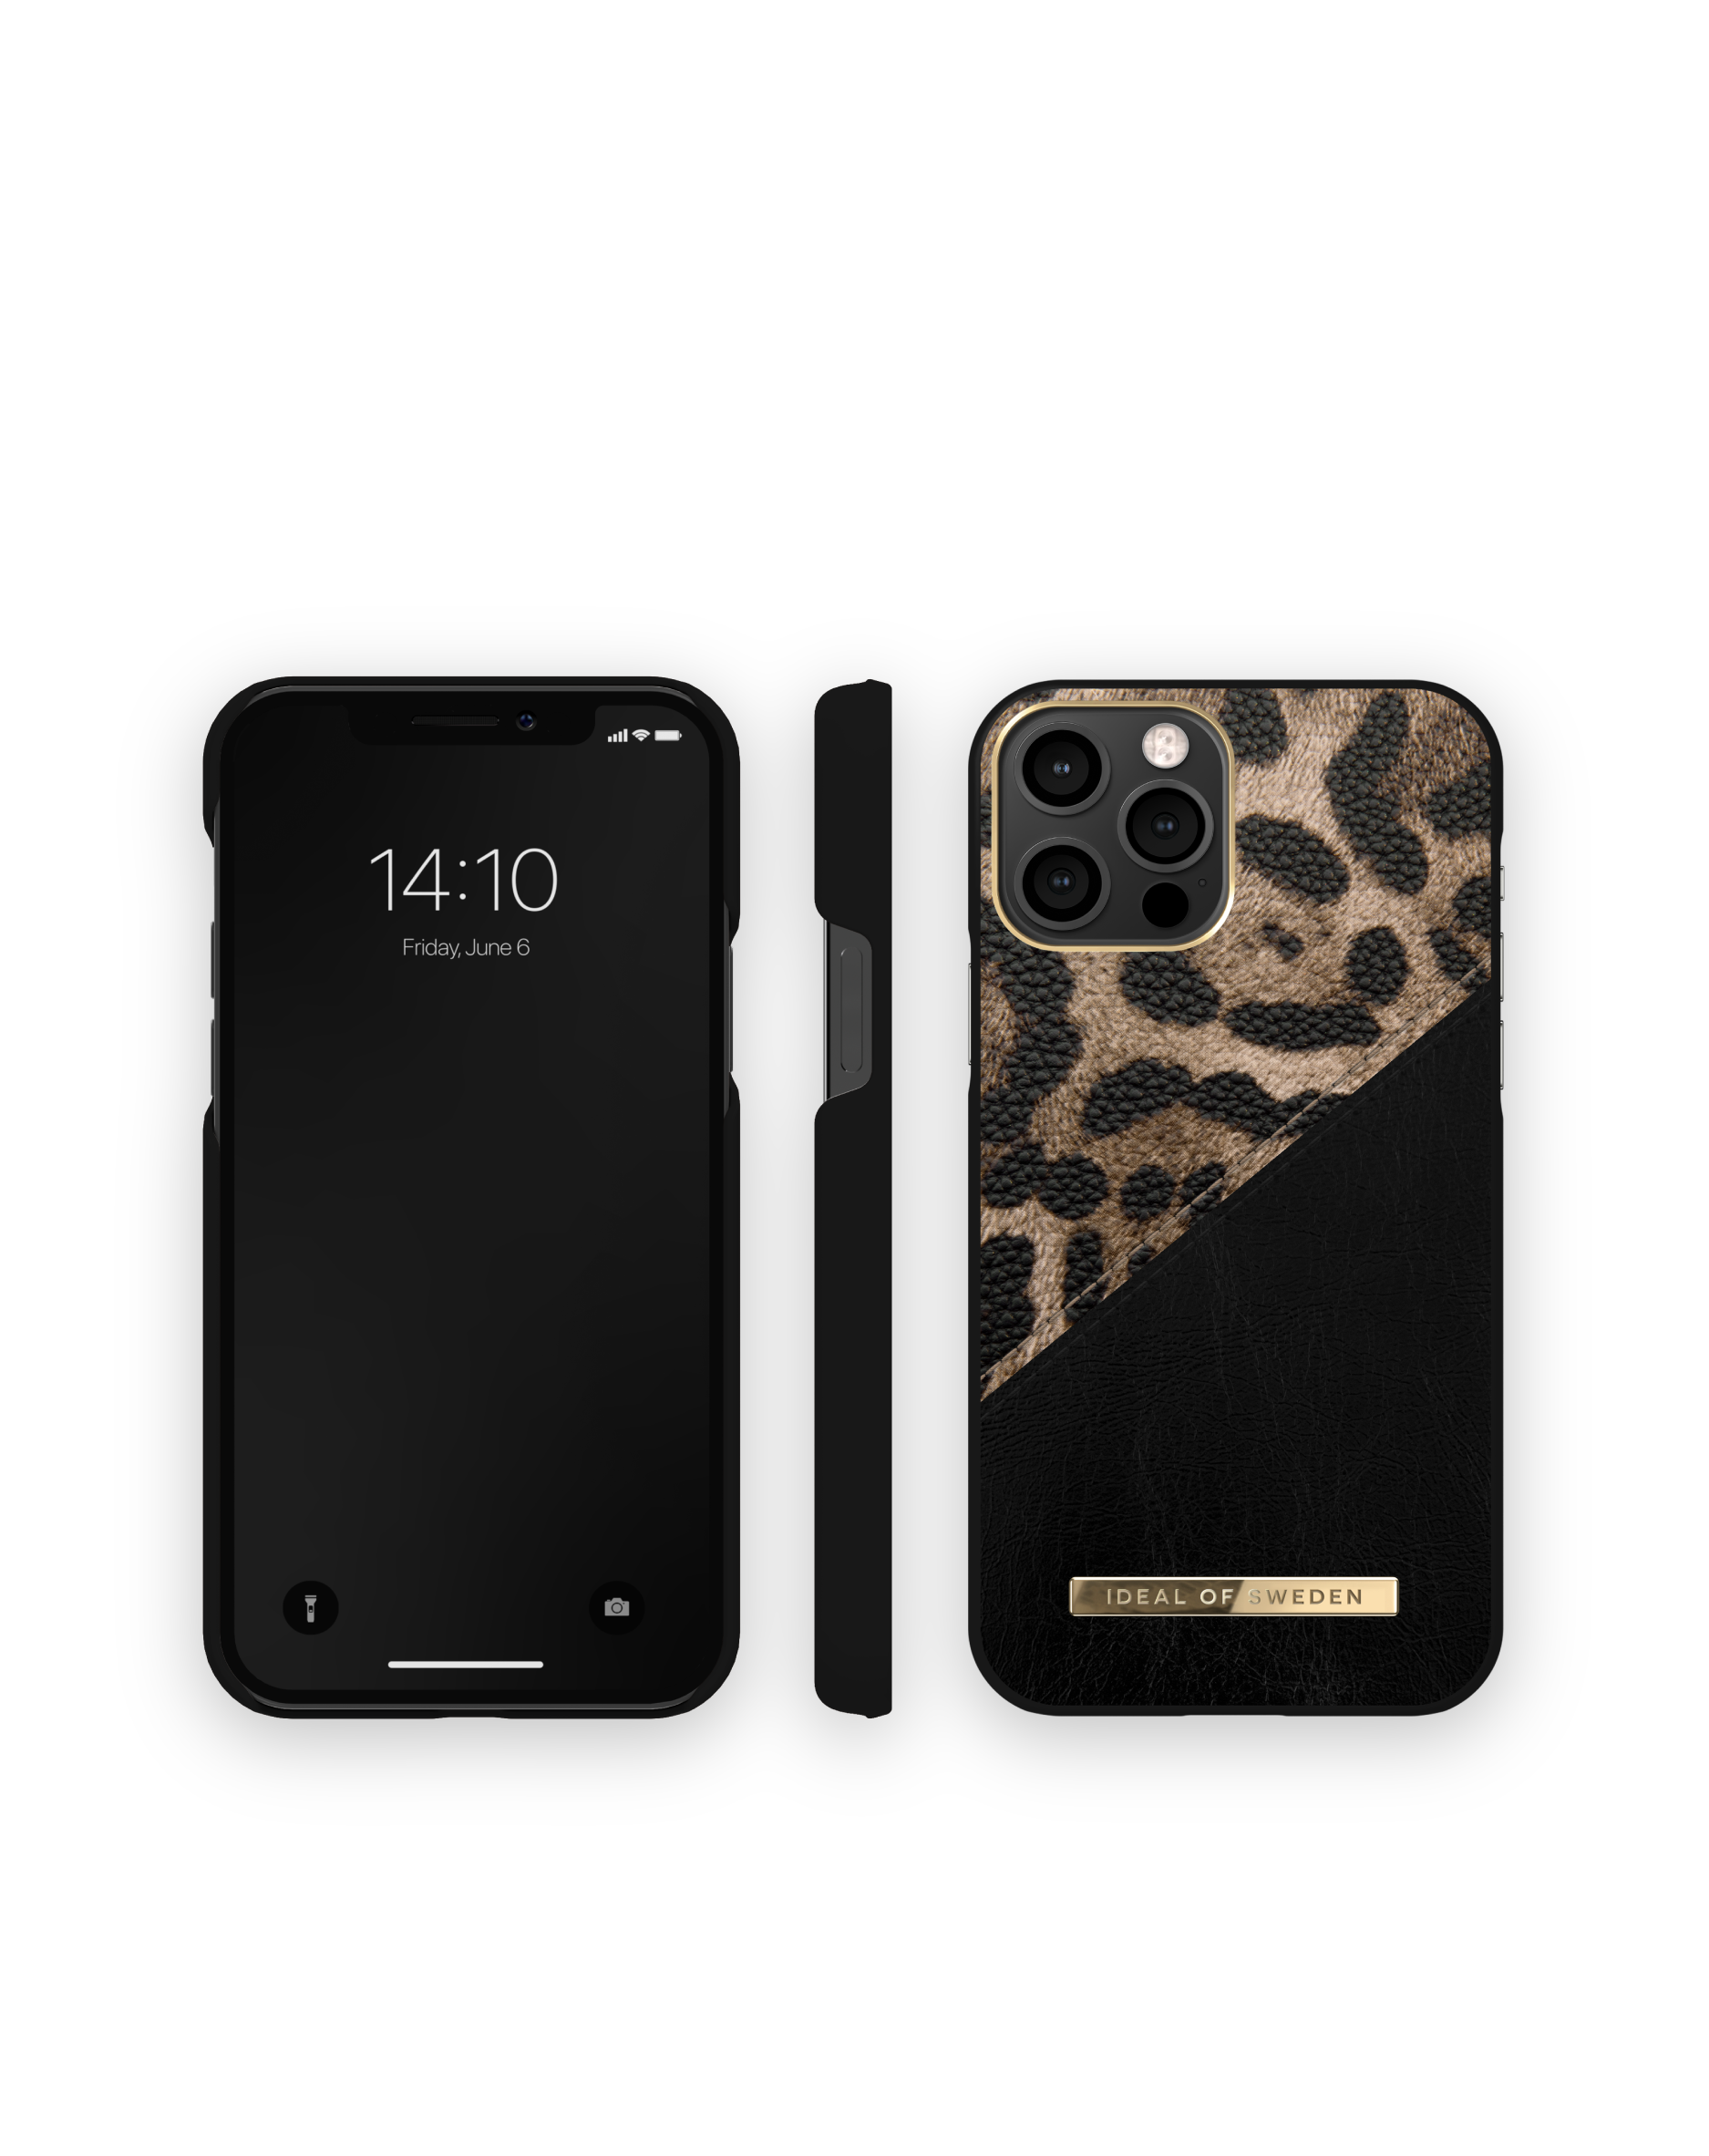 Apple, IDACAW21-I2061-330, SWEDEN Leopard Midnight IDEAL Backcover, 12/12 Pro, iPhone OF